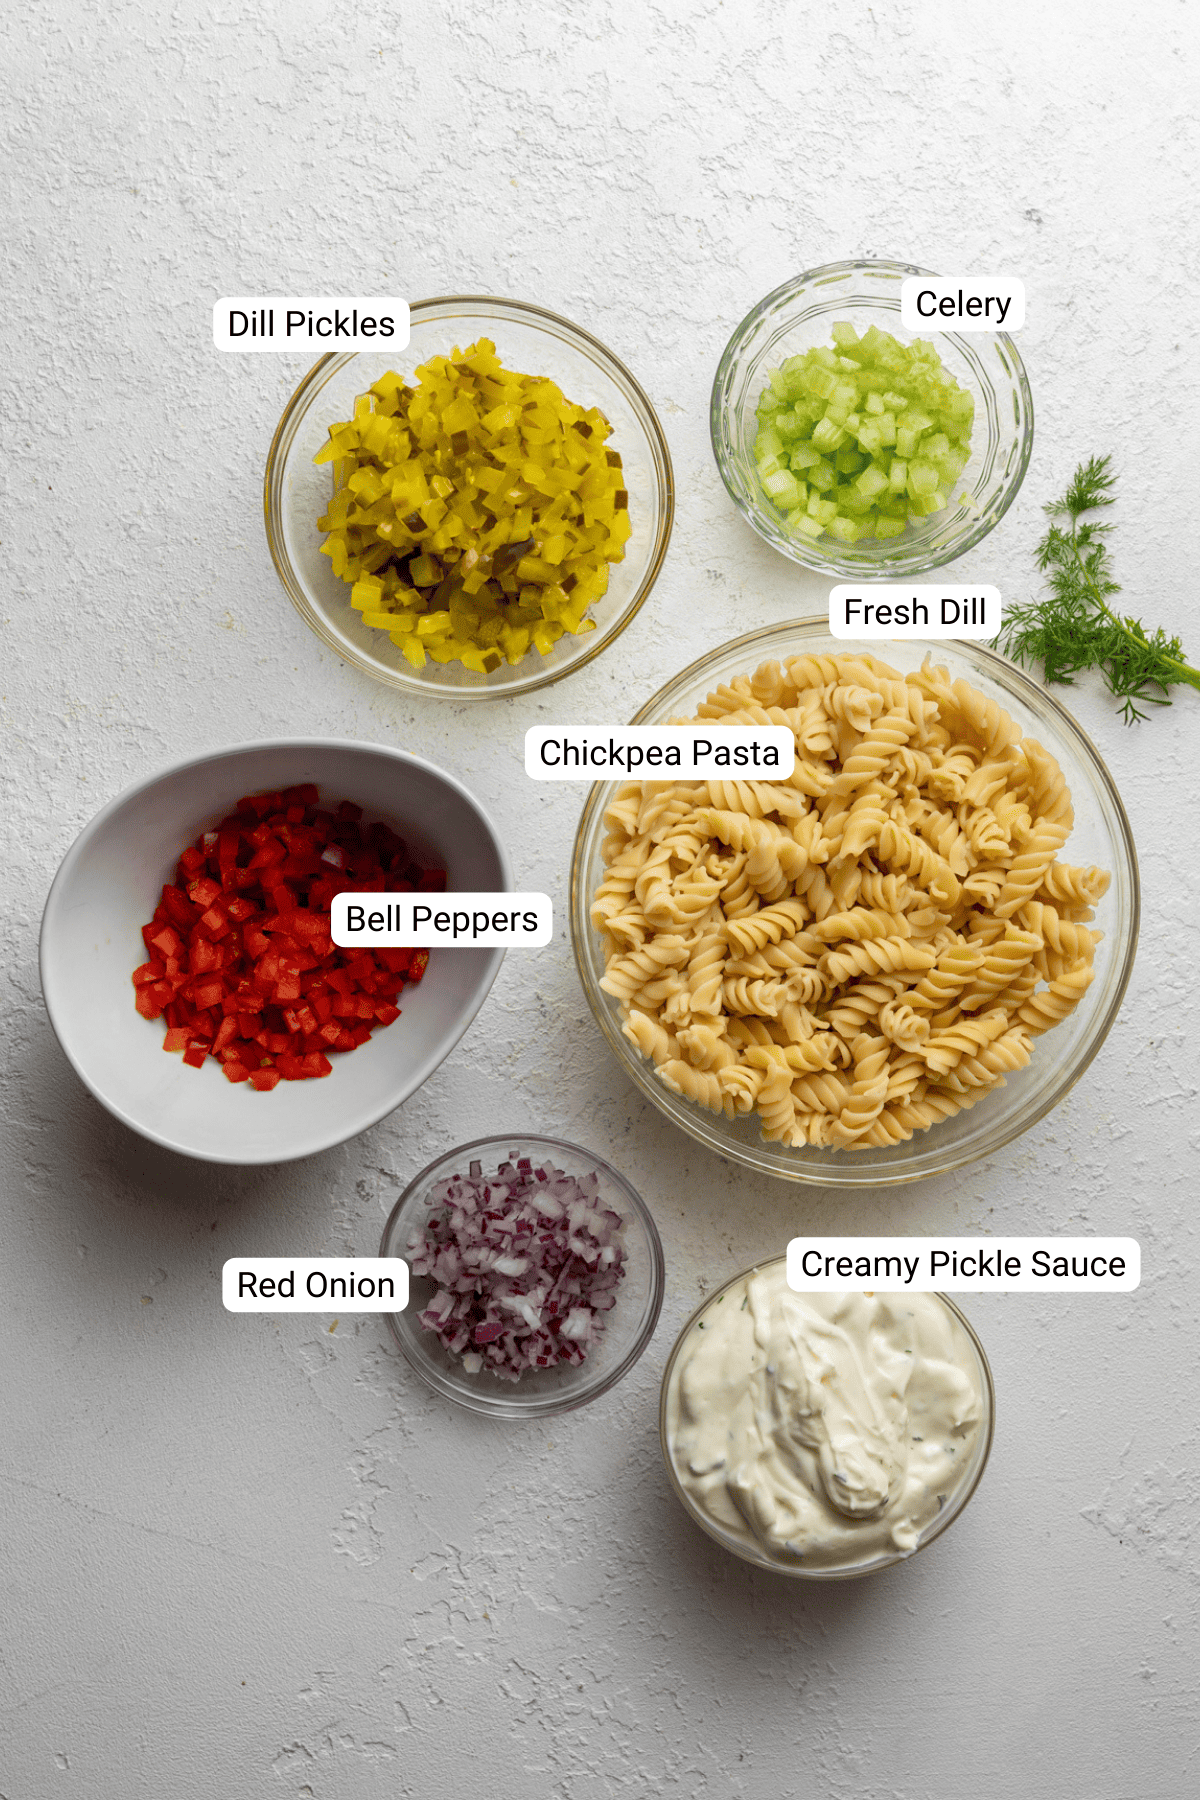 Pasta salad ingredients including fresh dill, dill pickles, and creamy pickle sauce.